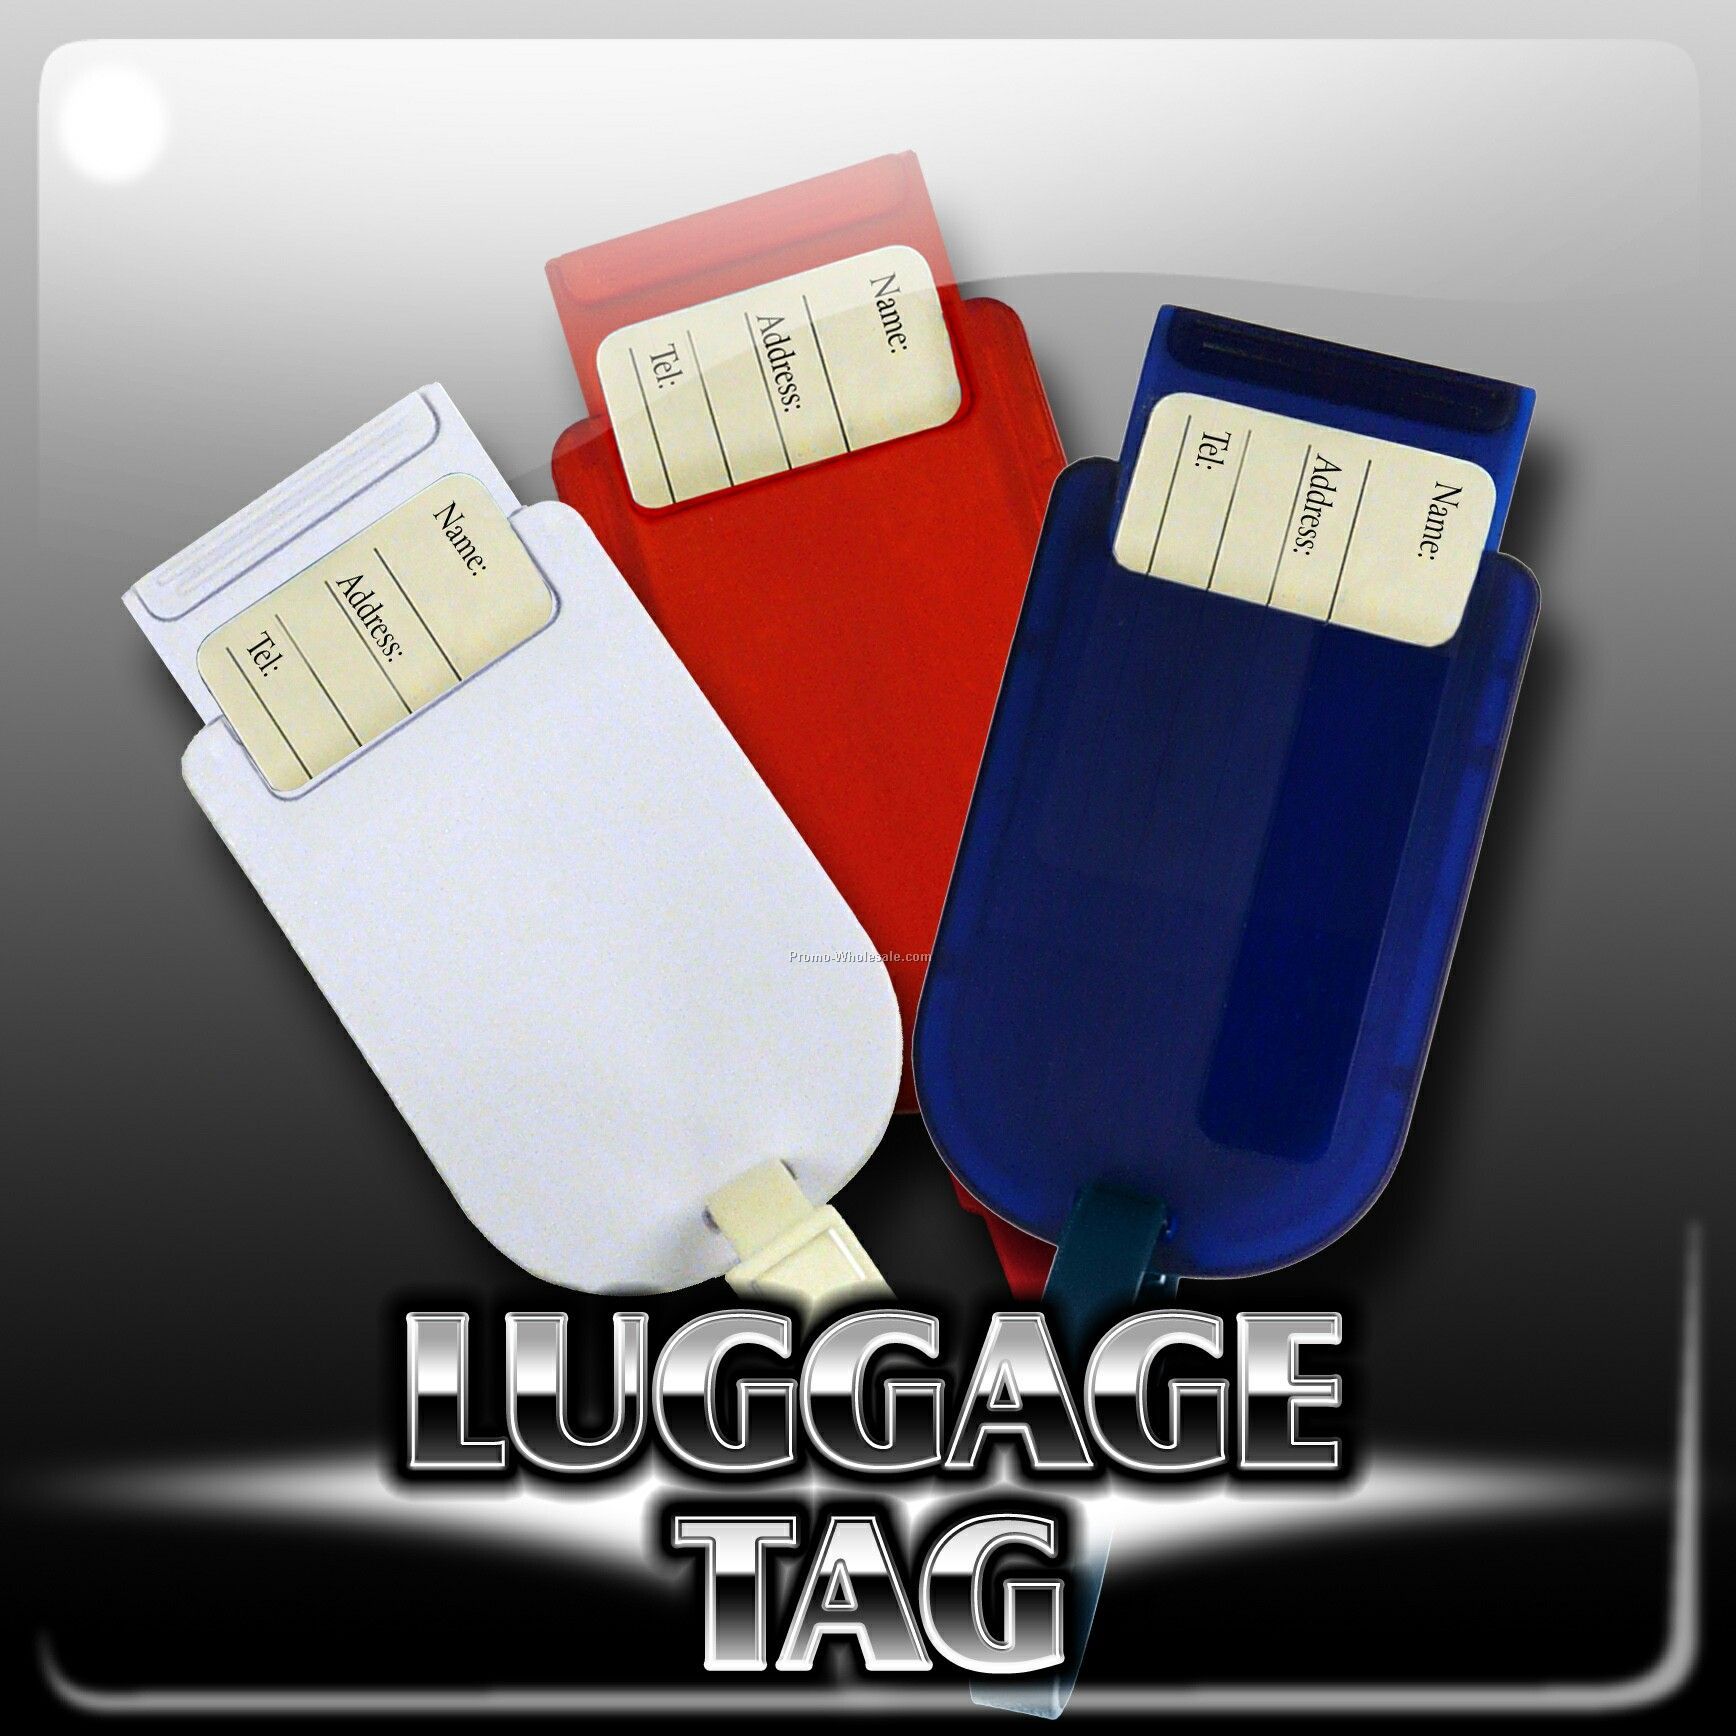 Luggage Tag W Slide-out Information Card